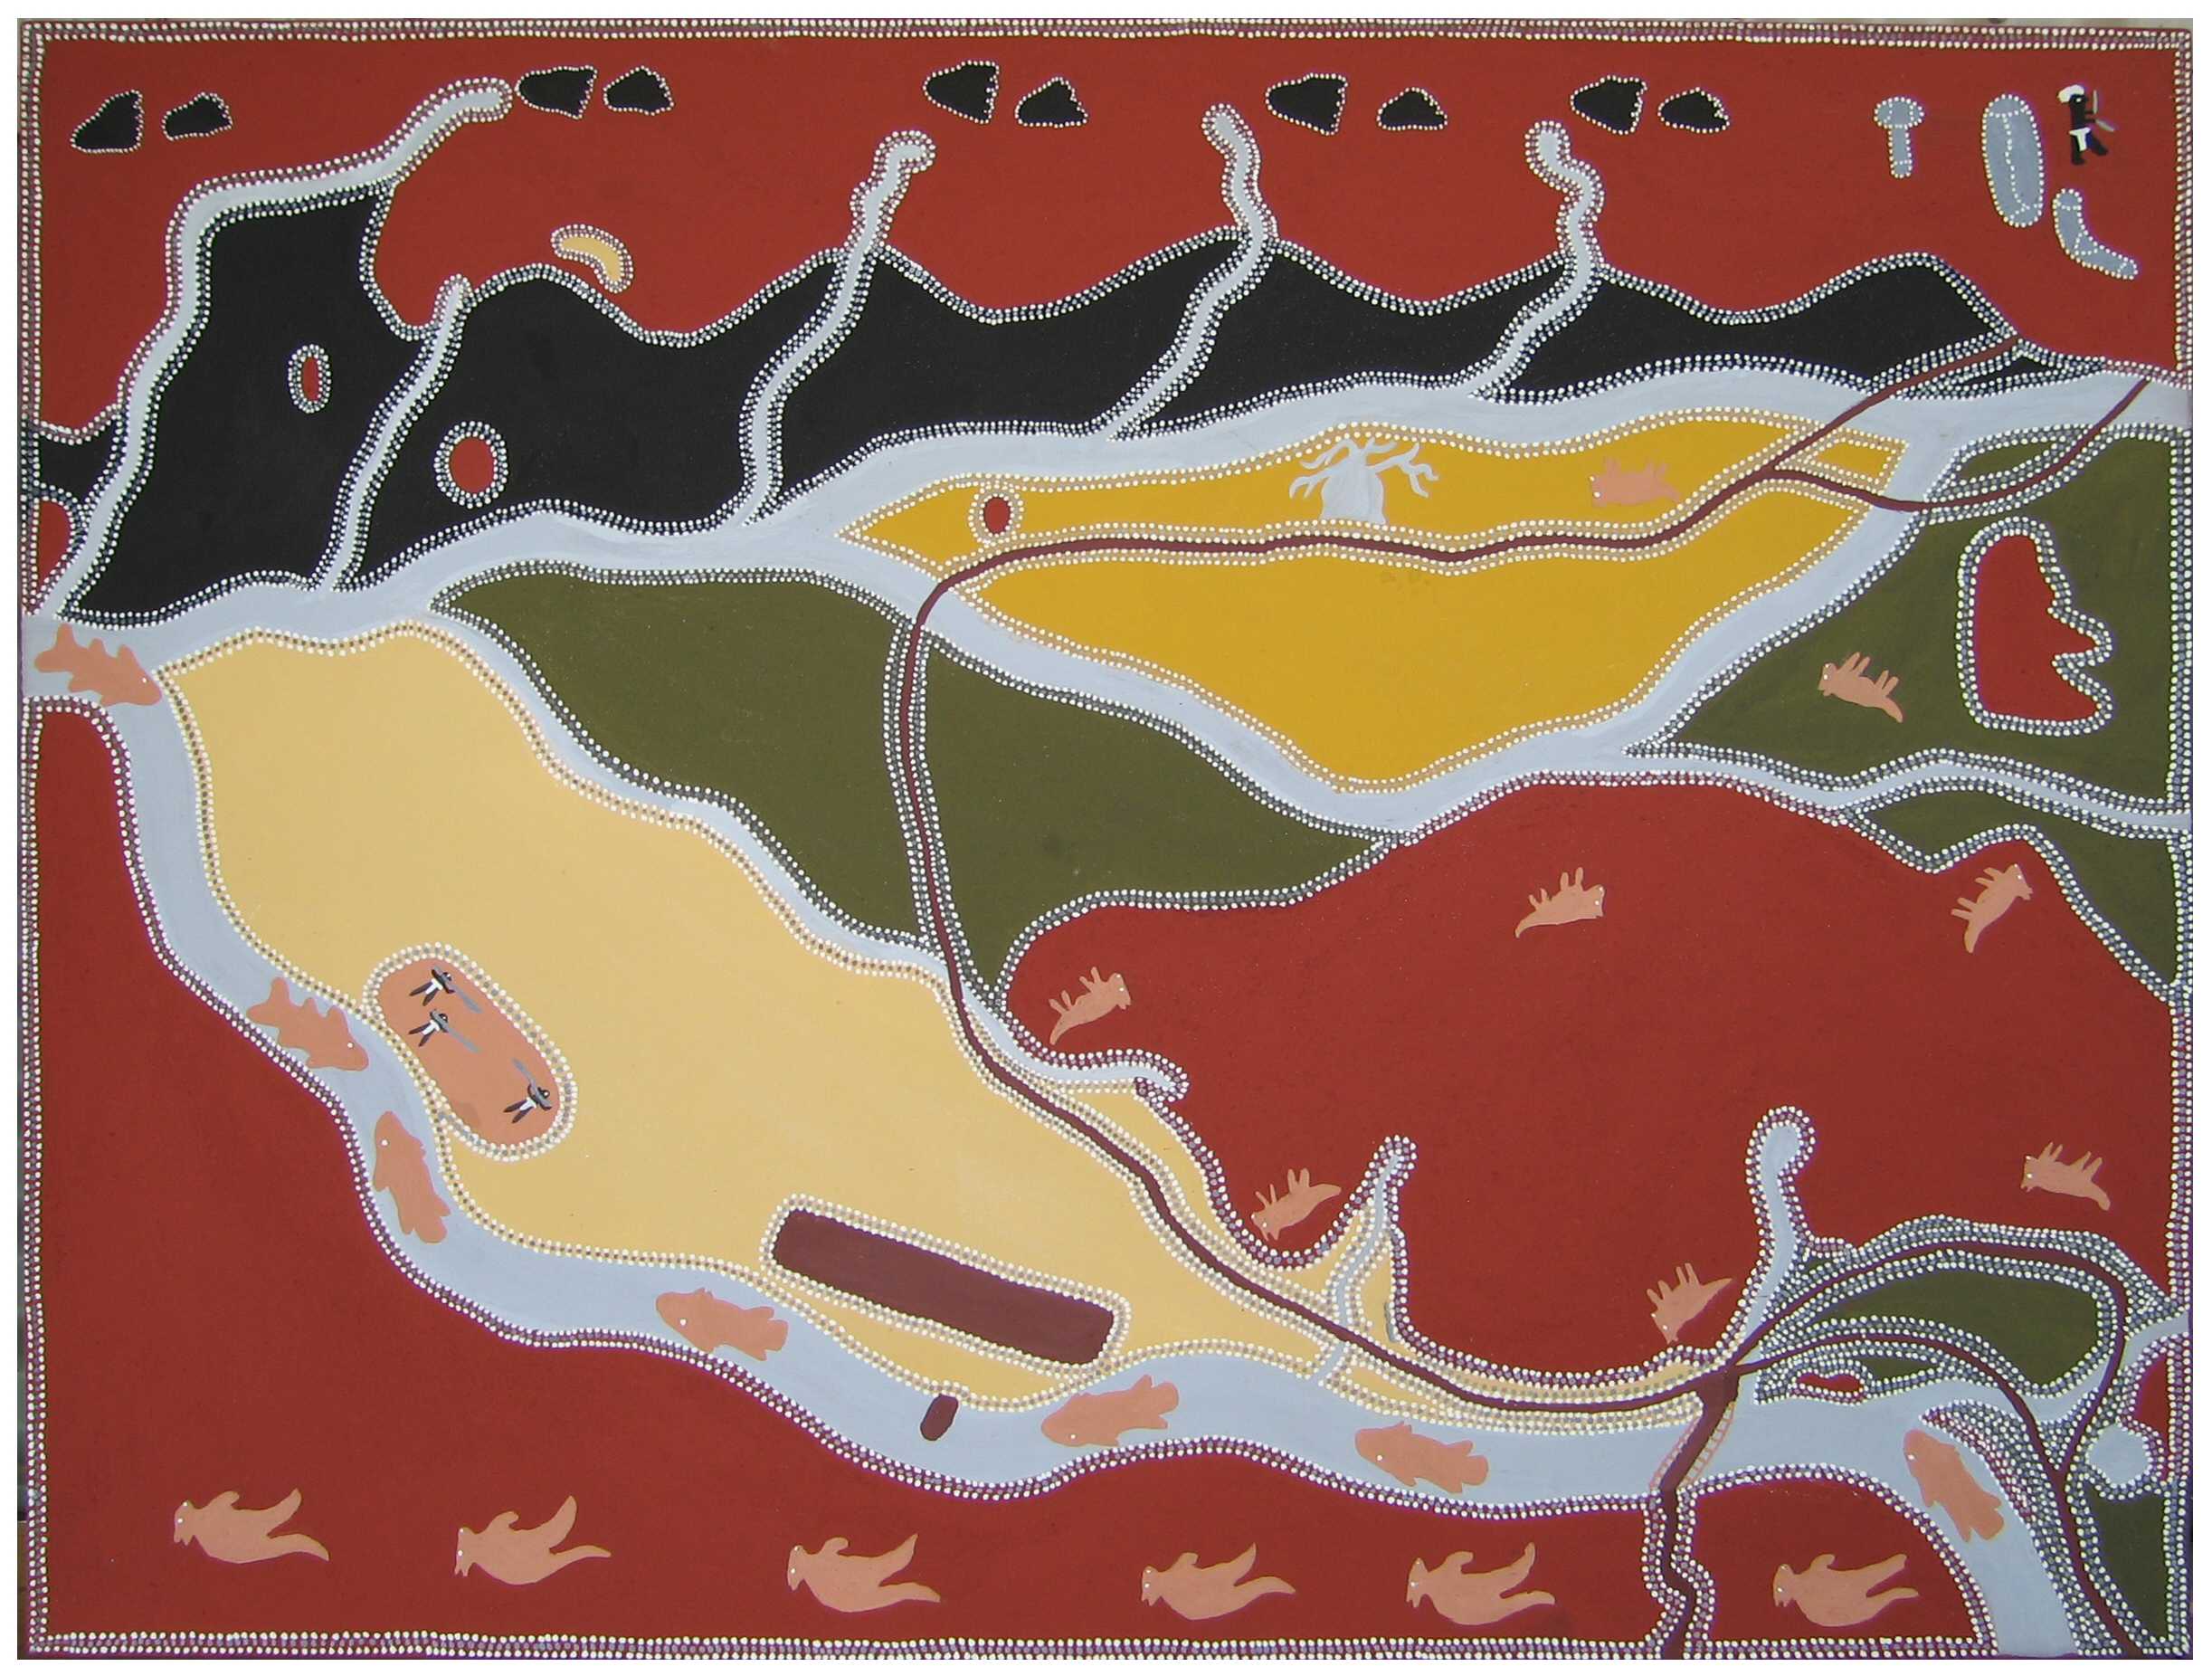 Image 01: Alan Griffiths, Timber Creek Area, natural ochre and pigment on canvas, 90x120cm, 2004. Image courtesy Waringarri Aboriginal Arts